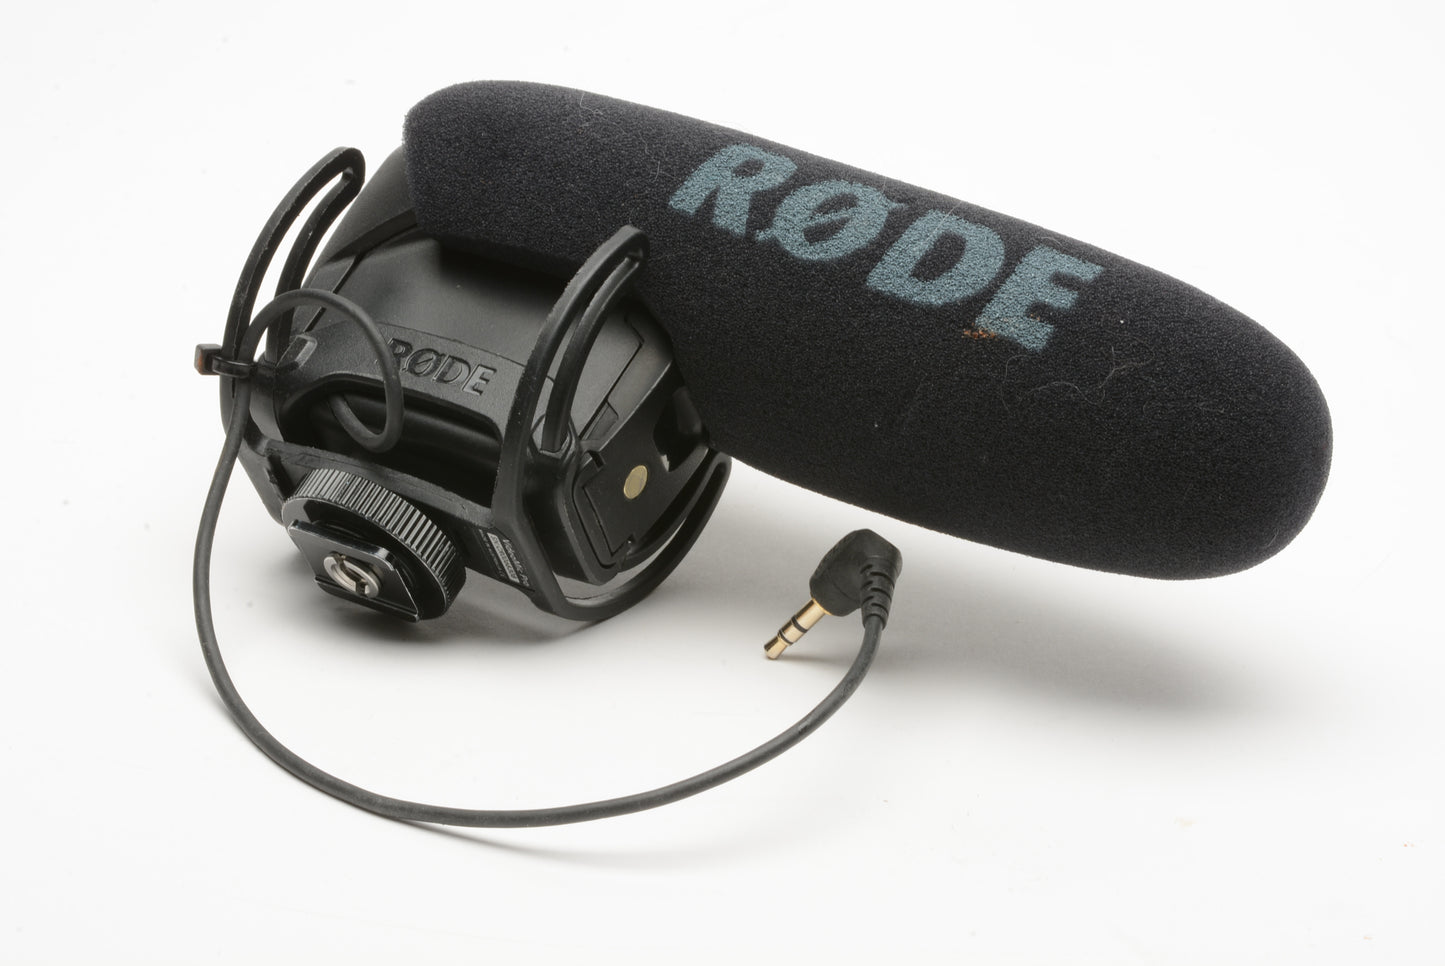 Rode Video Mic Pro, Very clean